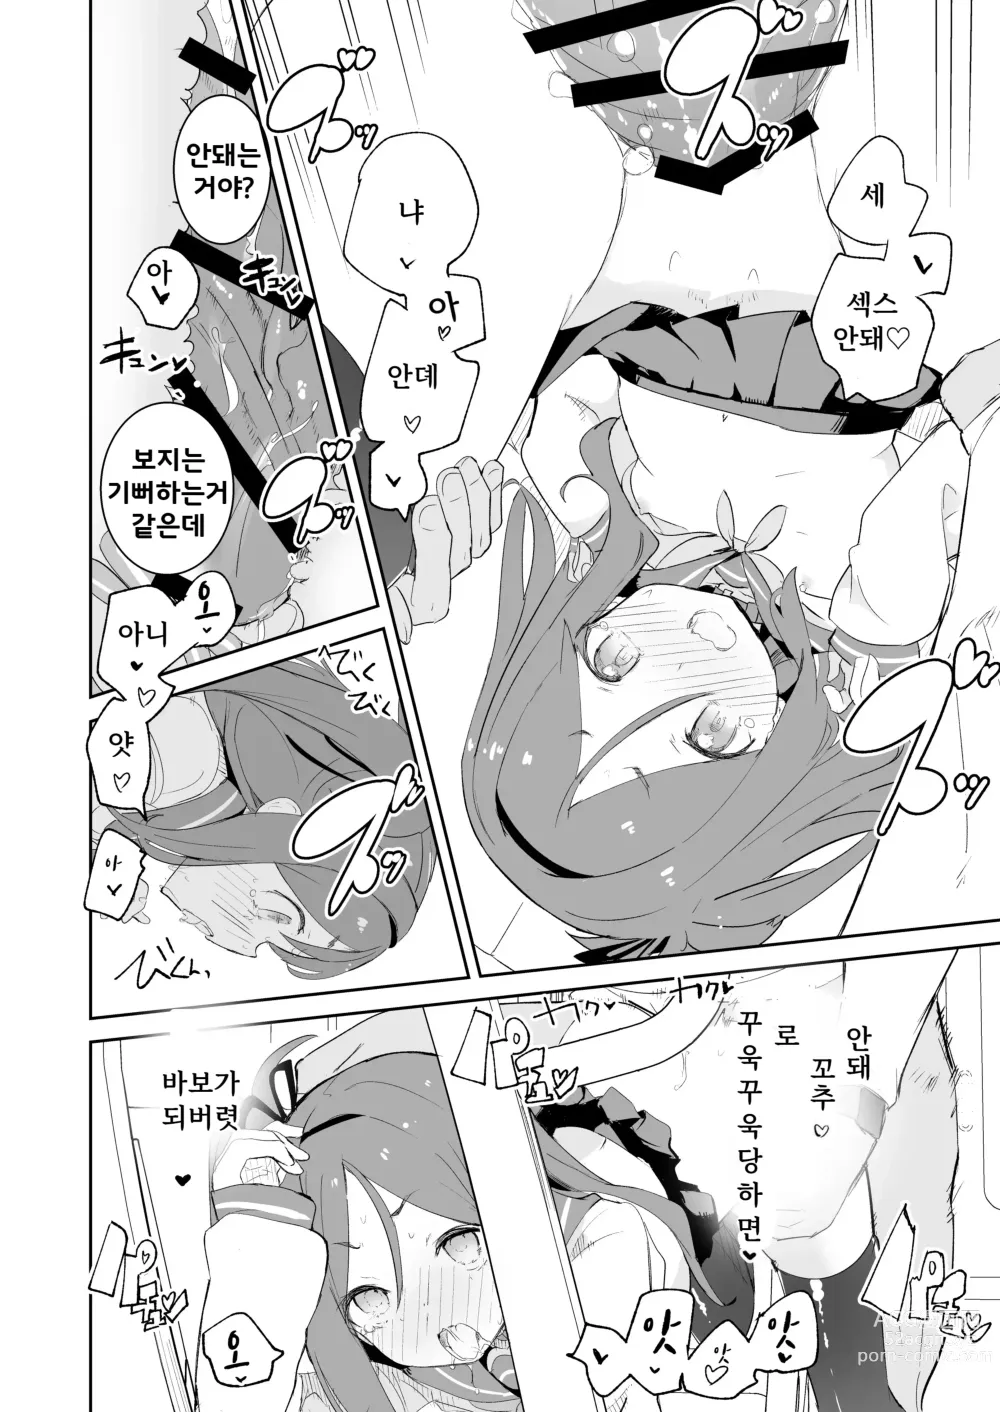 Page 25 of doujinshi S.S.S.X